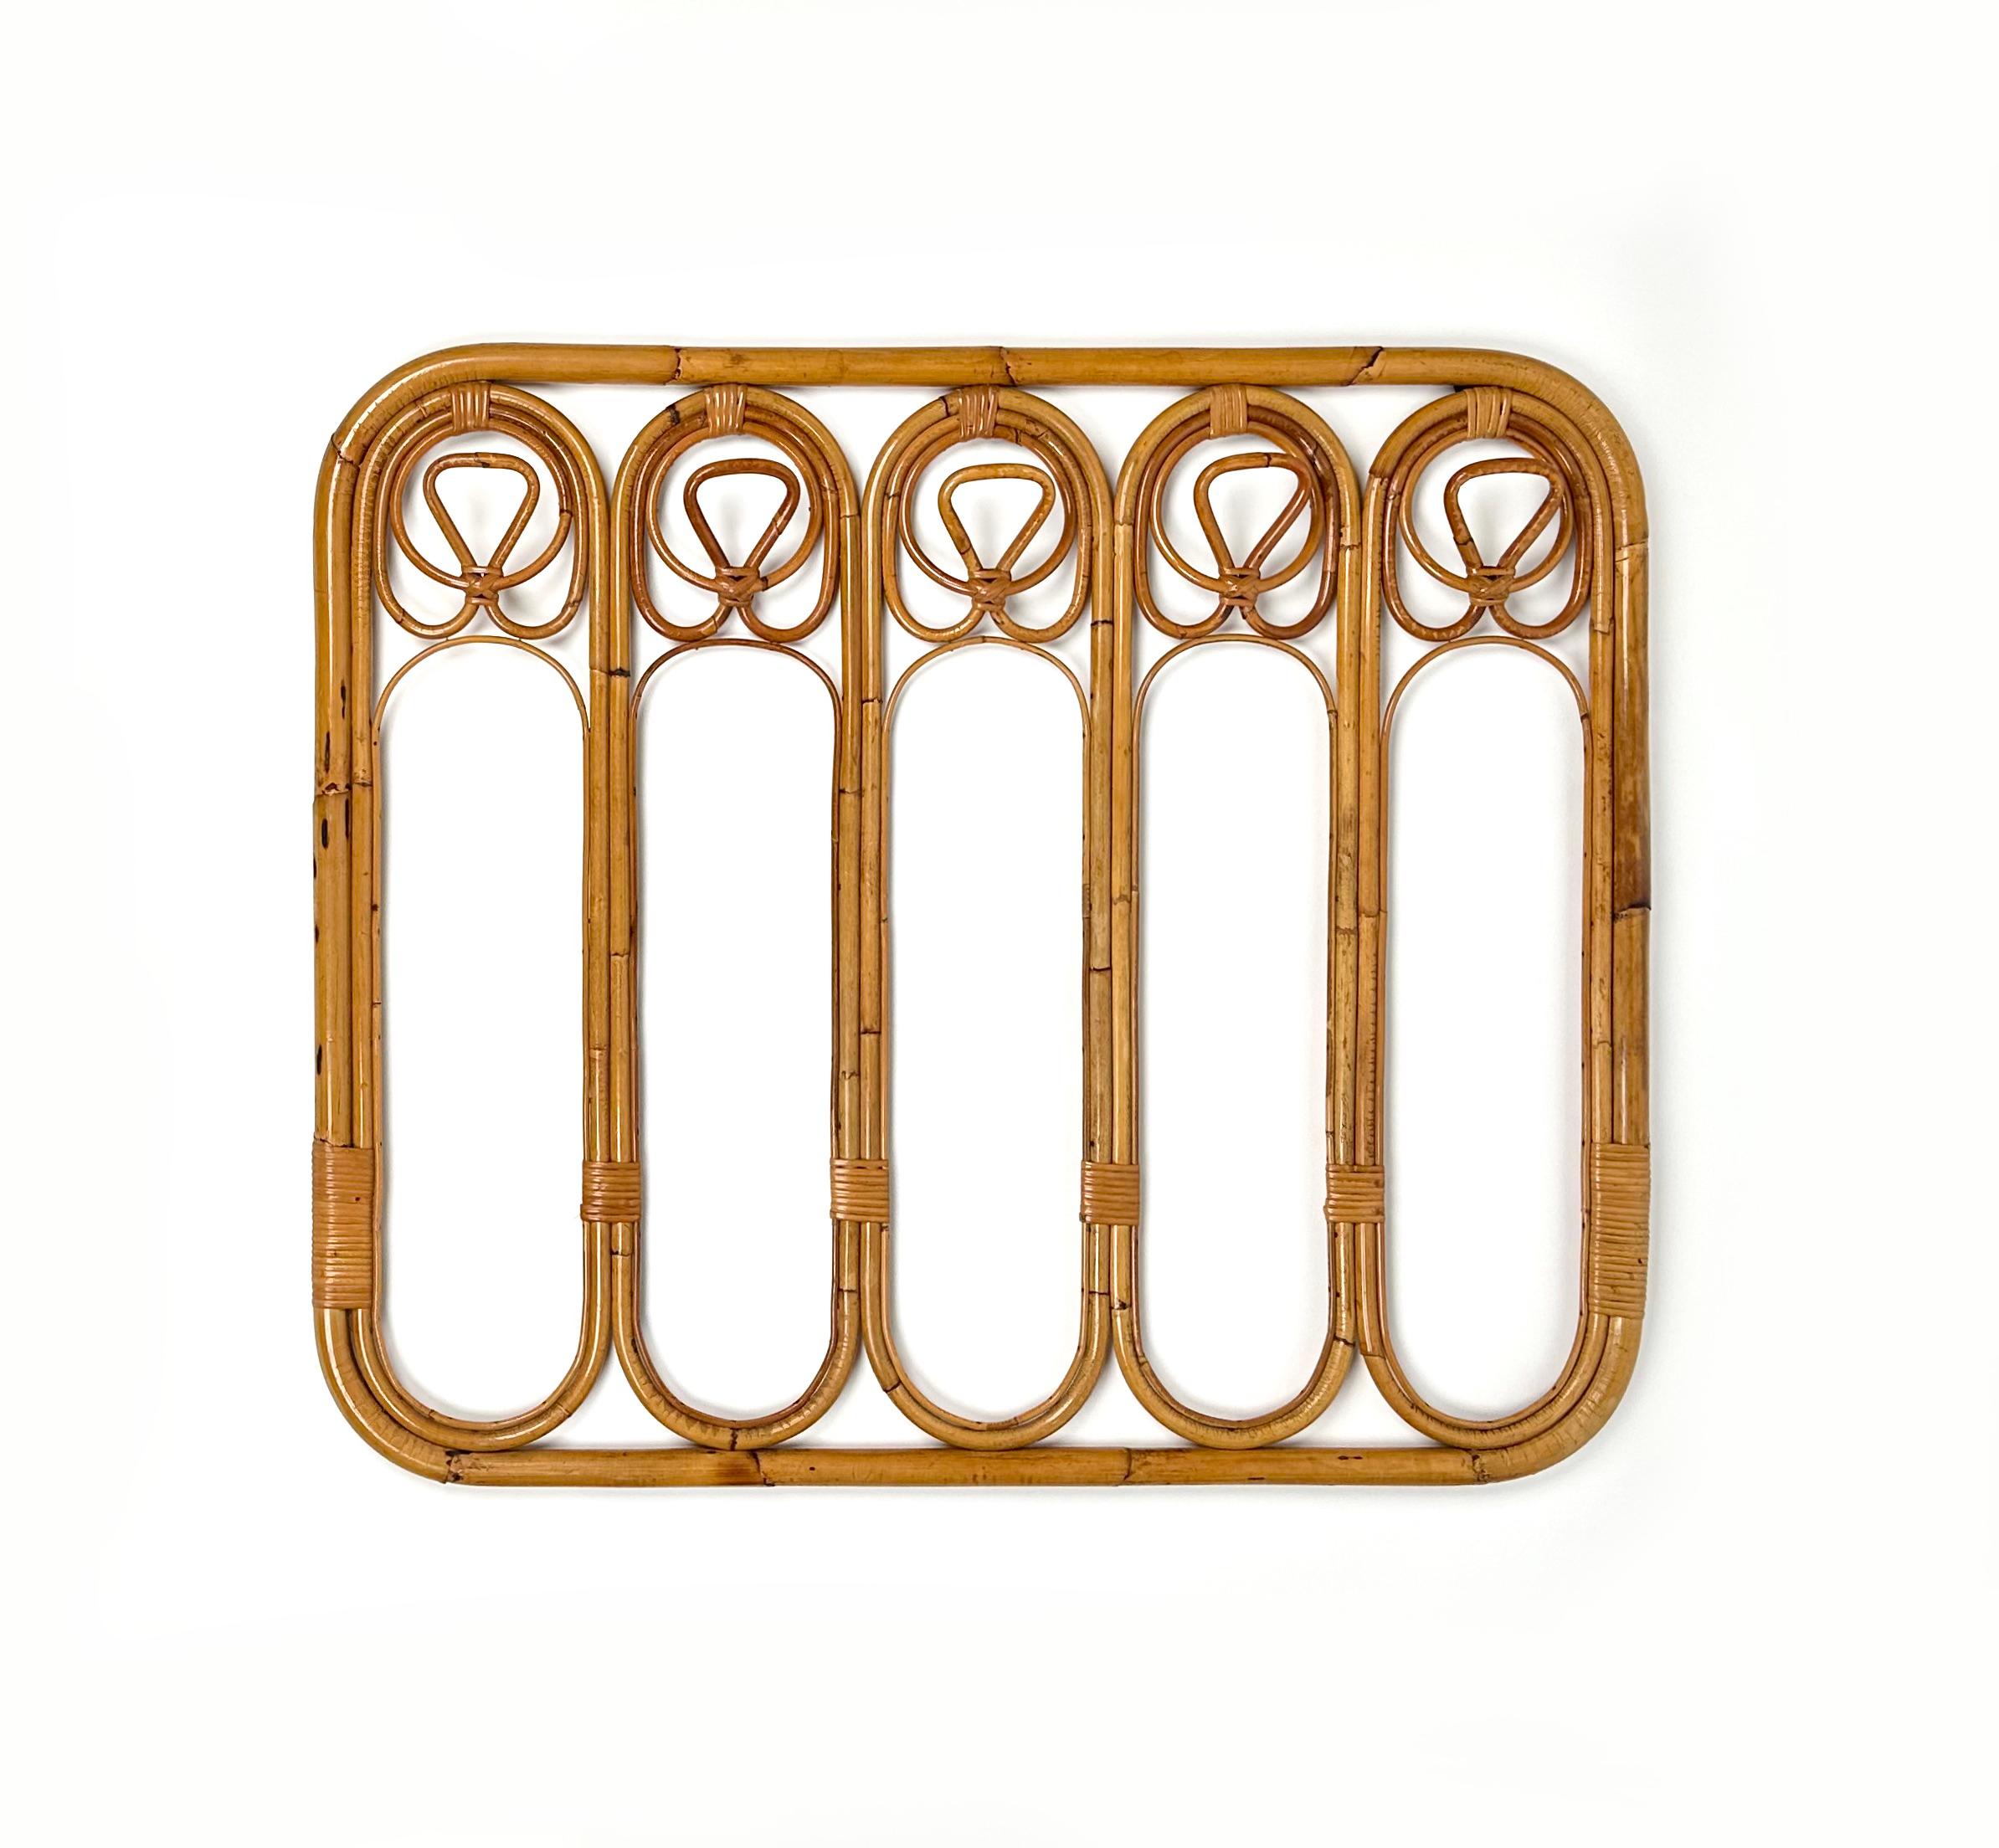 Big rectangular coat hanger with rounded corners in bamboo and rattan featuring five hooks.

Made in Italy in the 1960s.